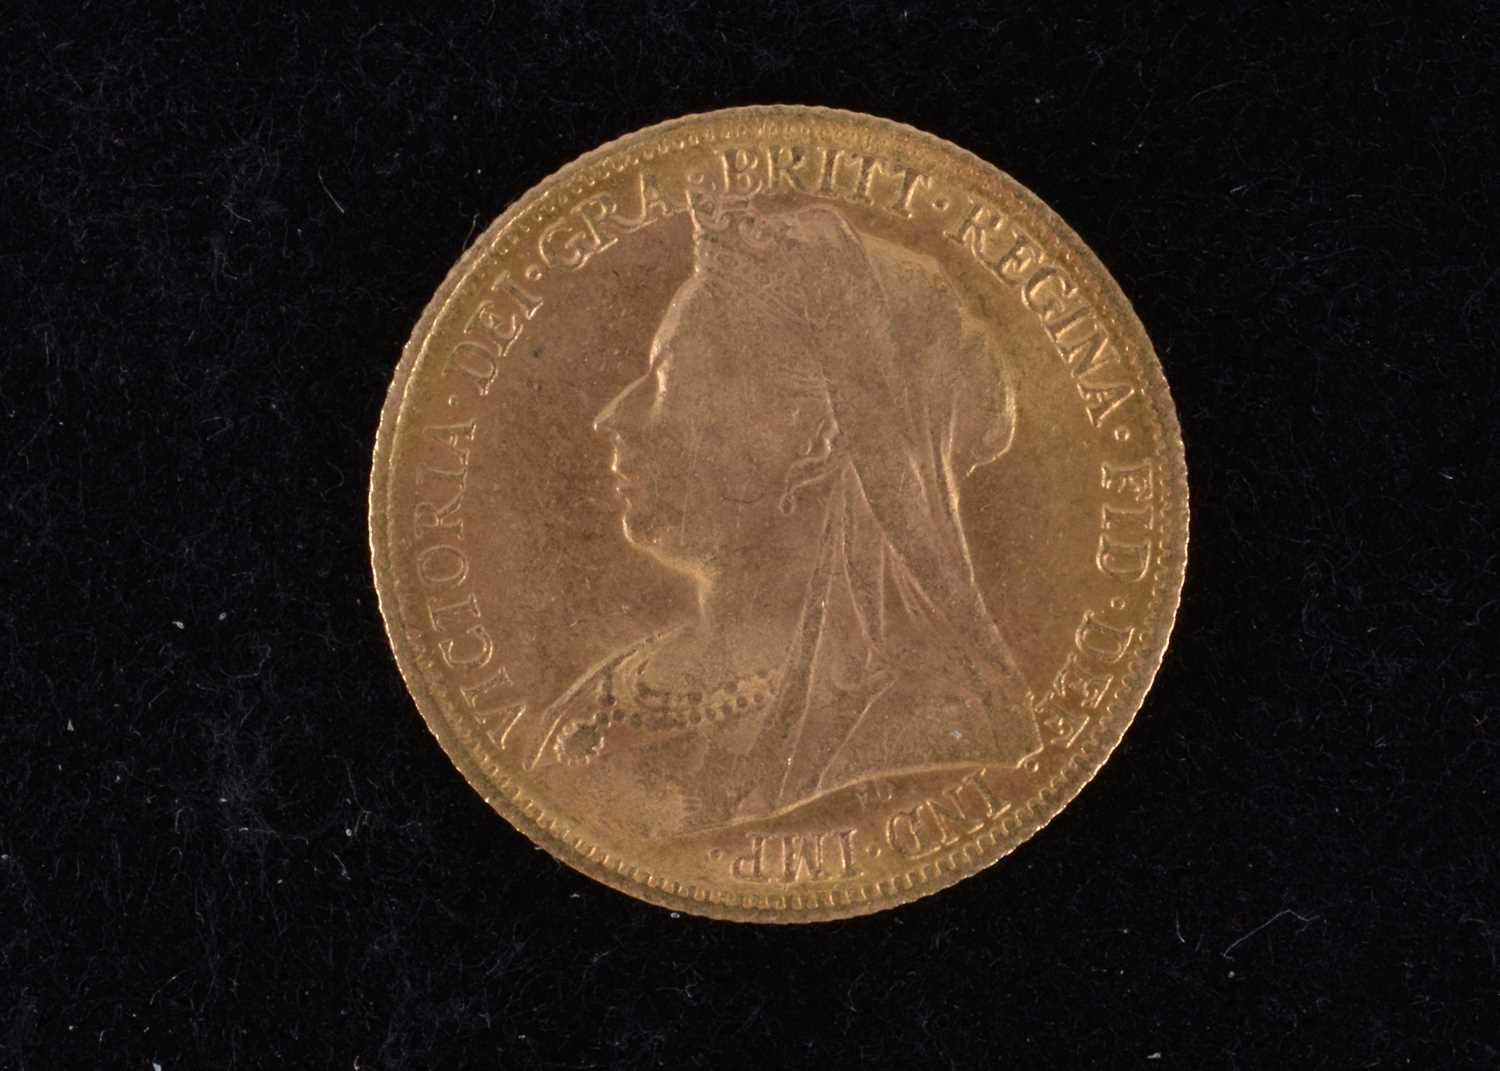 A Victoria style gold coin,